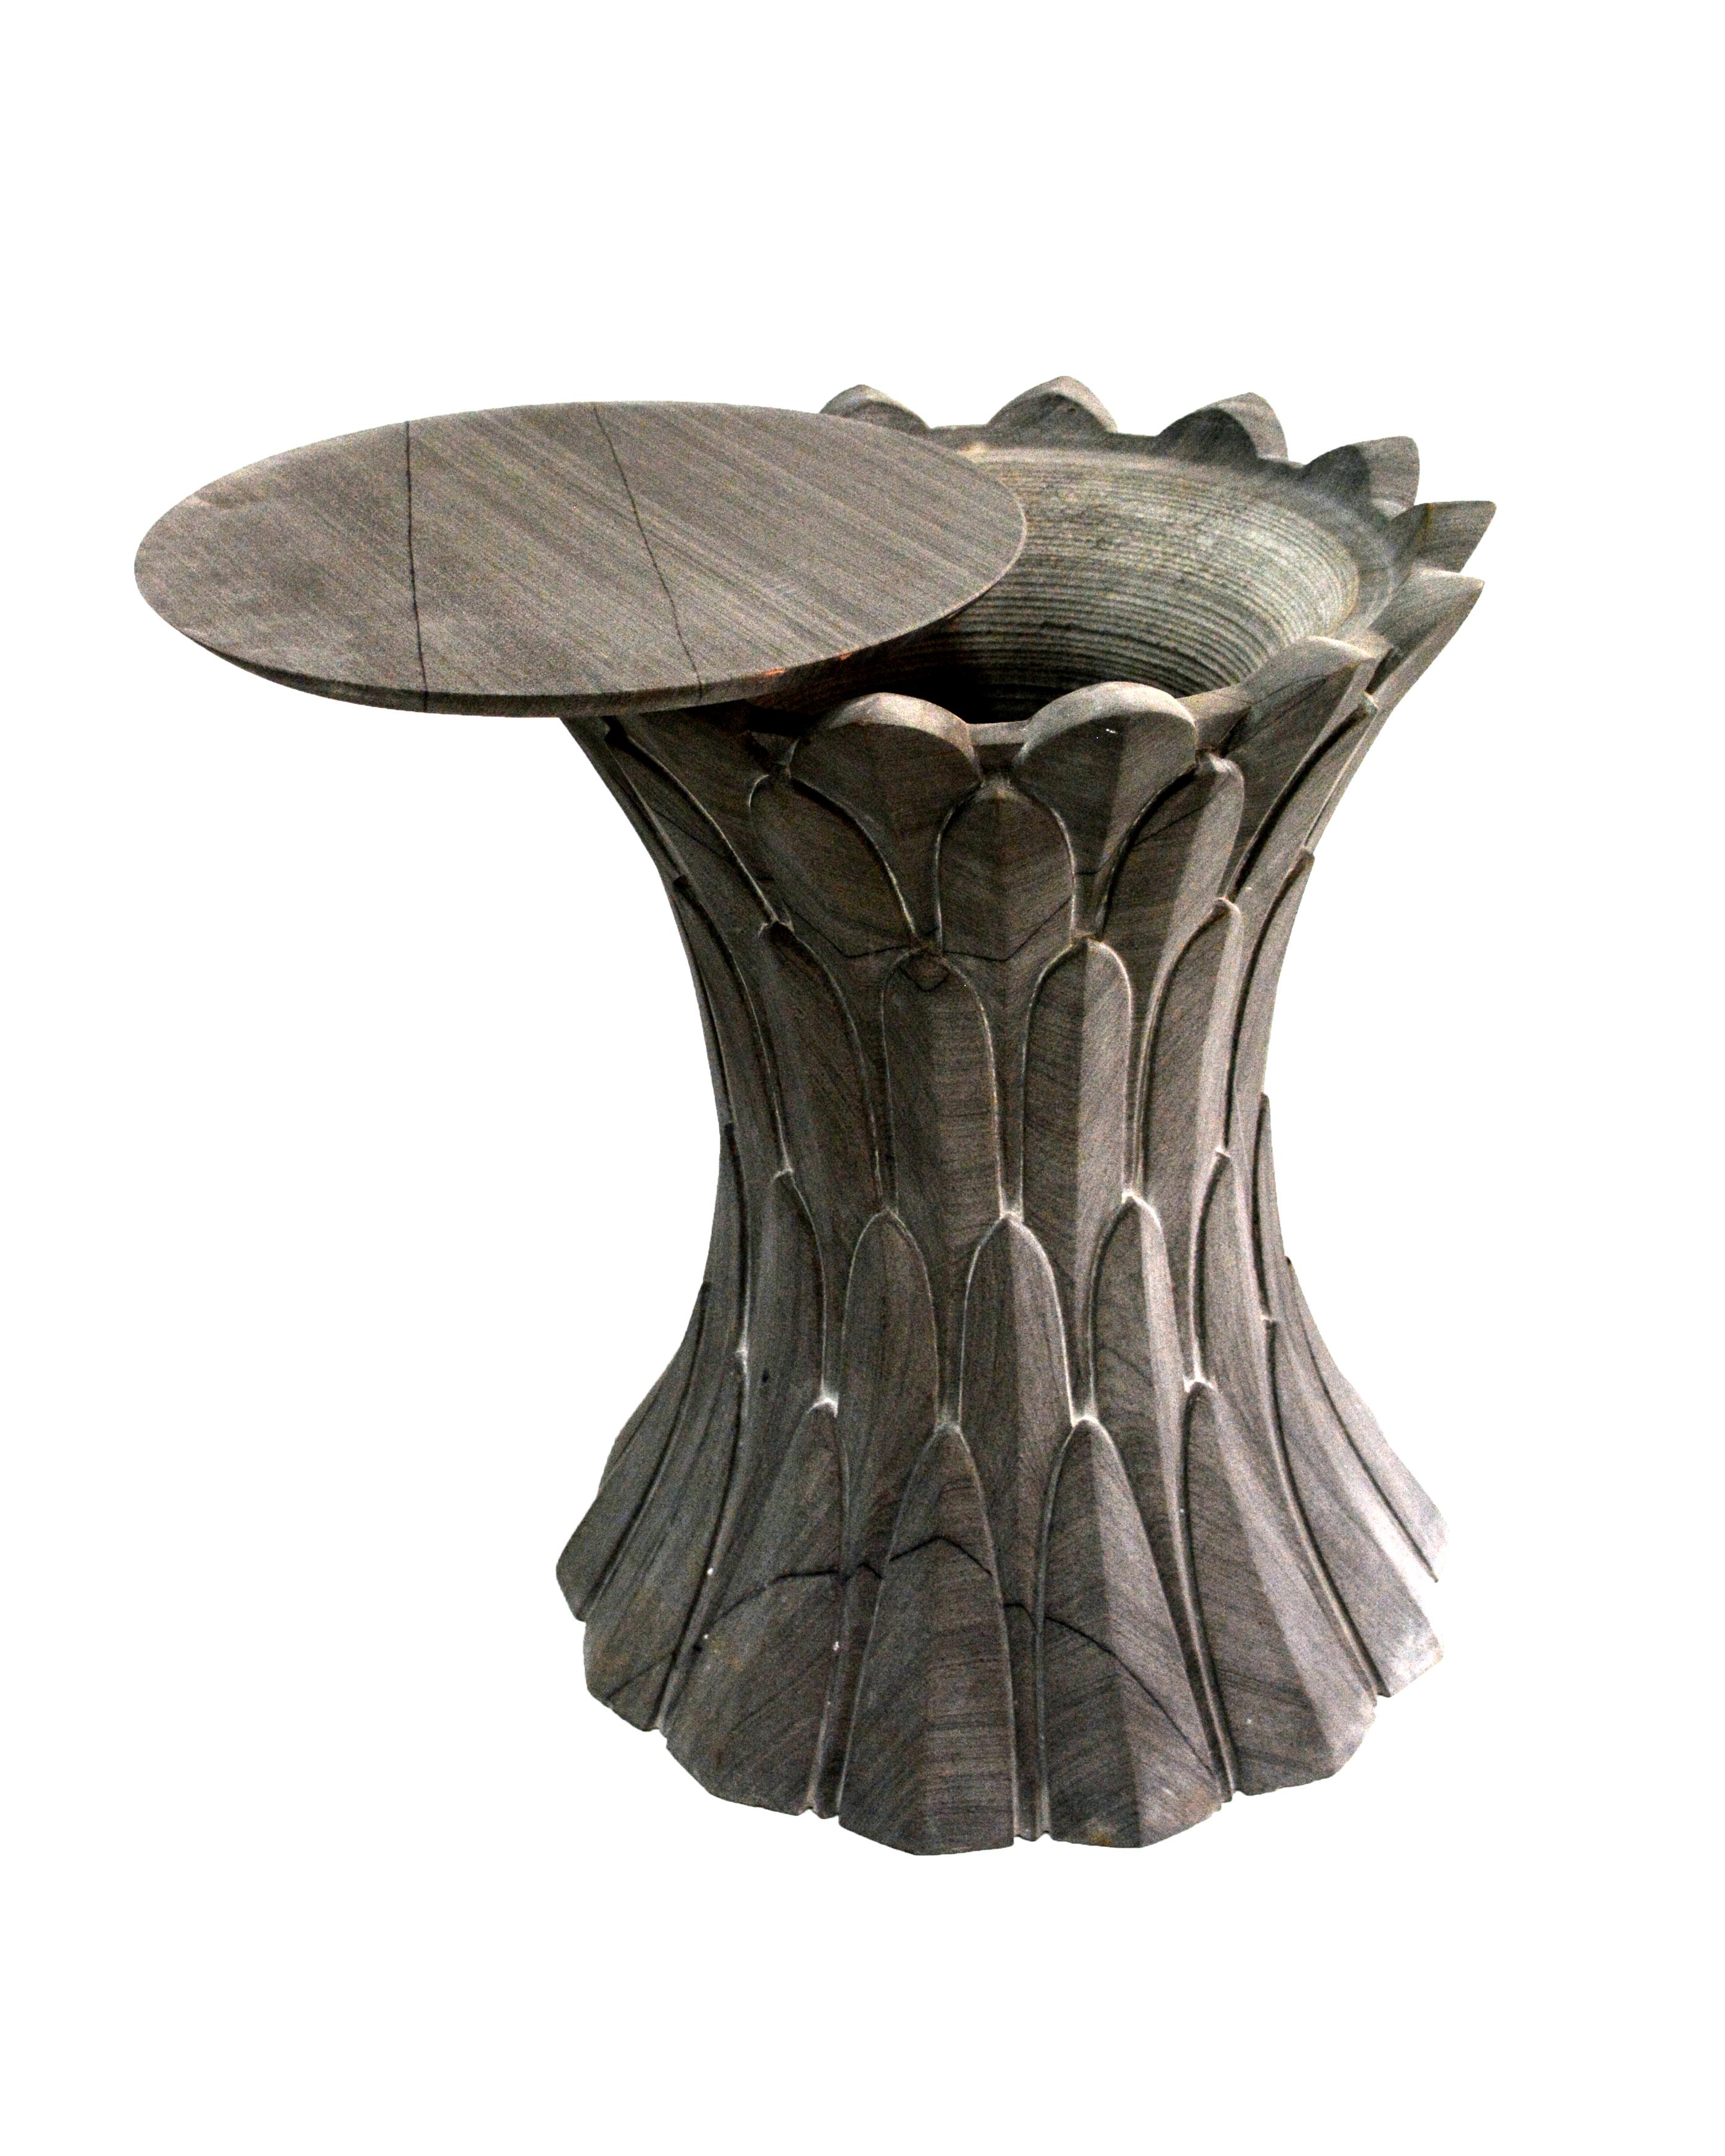 Introducing the Feathers Art Nouveau Side Tables in Agra Grey Stone - a mesmerizing set of art nouveau side tables handcrafted in India. Designed by Stephanie Odegard, these art nouveau side tables draw inspiration from the timeless beauty of Art